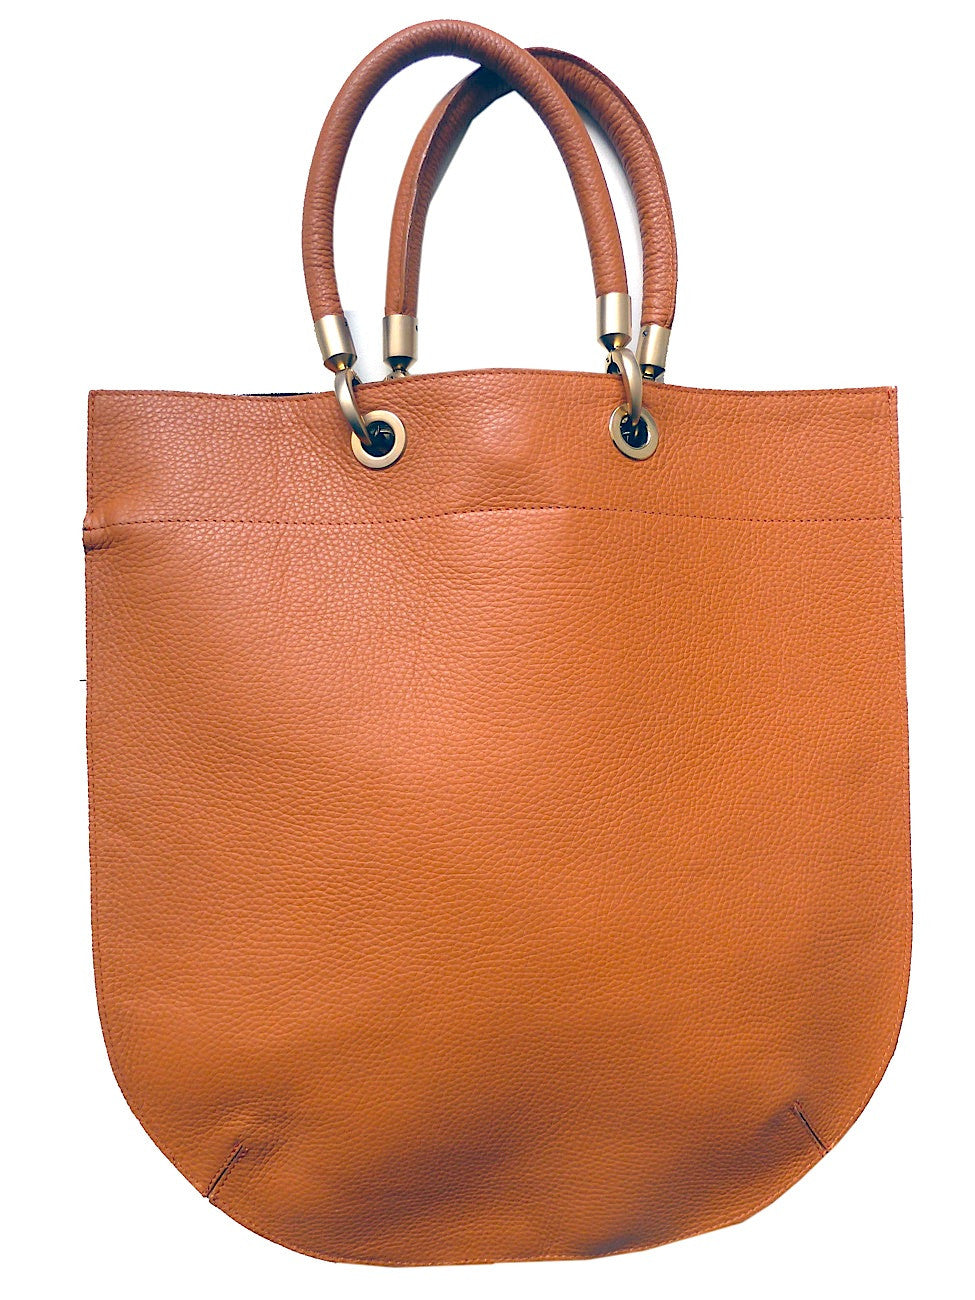 Flat Oblong Pebble Grain Leather Tote Bag Chocolate